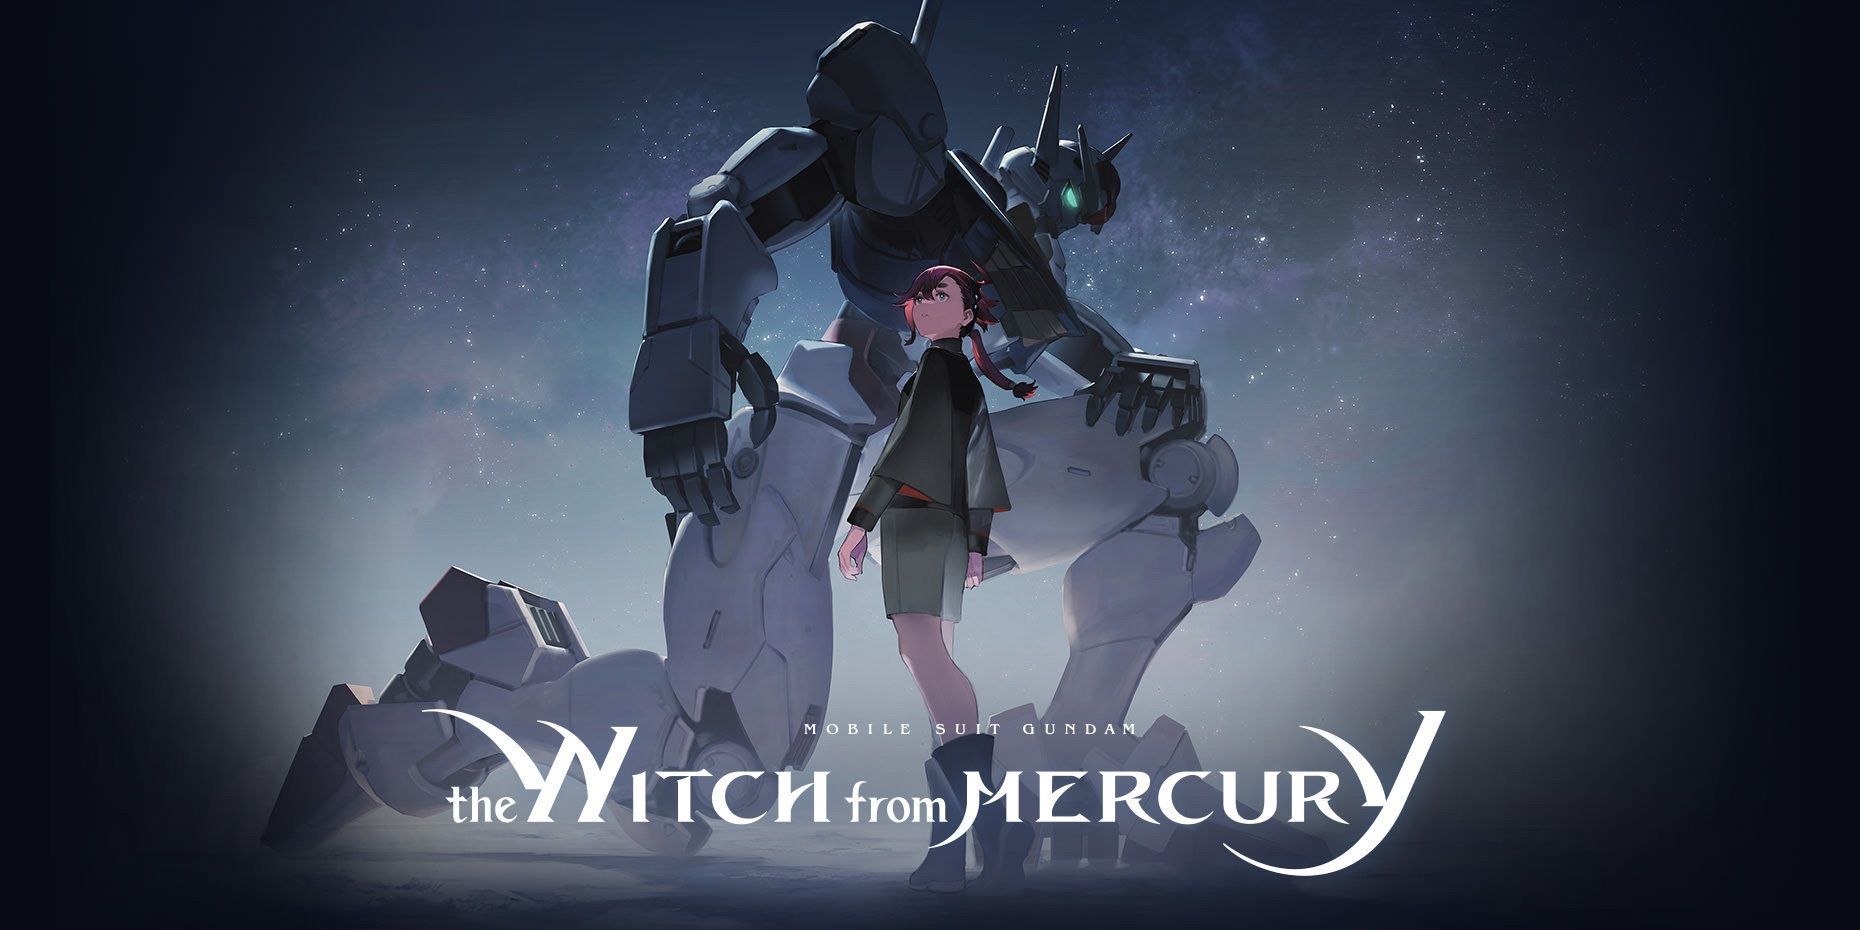 The unnamed protagonist of Gundam: The Witch from Mercury, alongside her Gundam, 